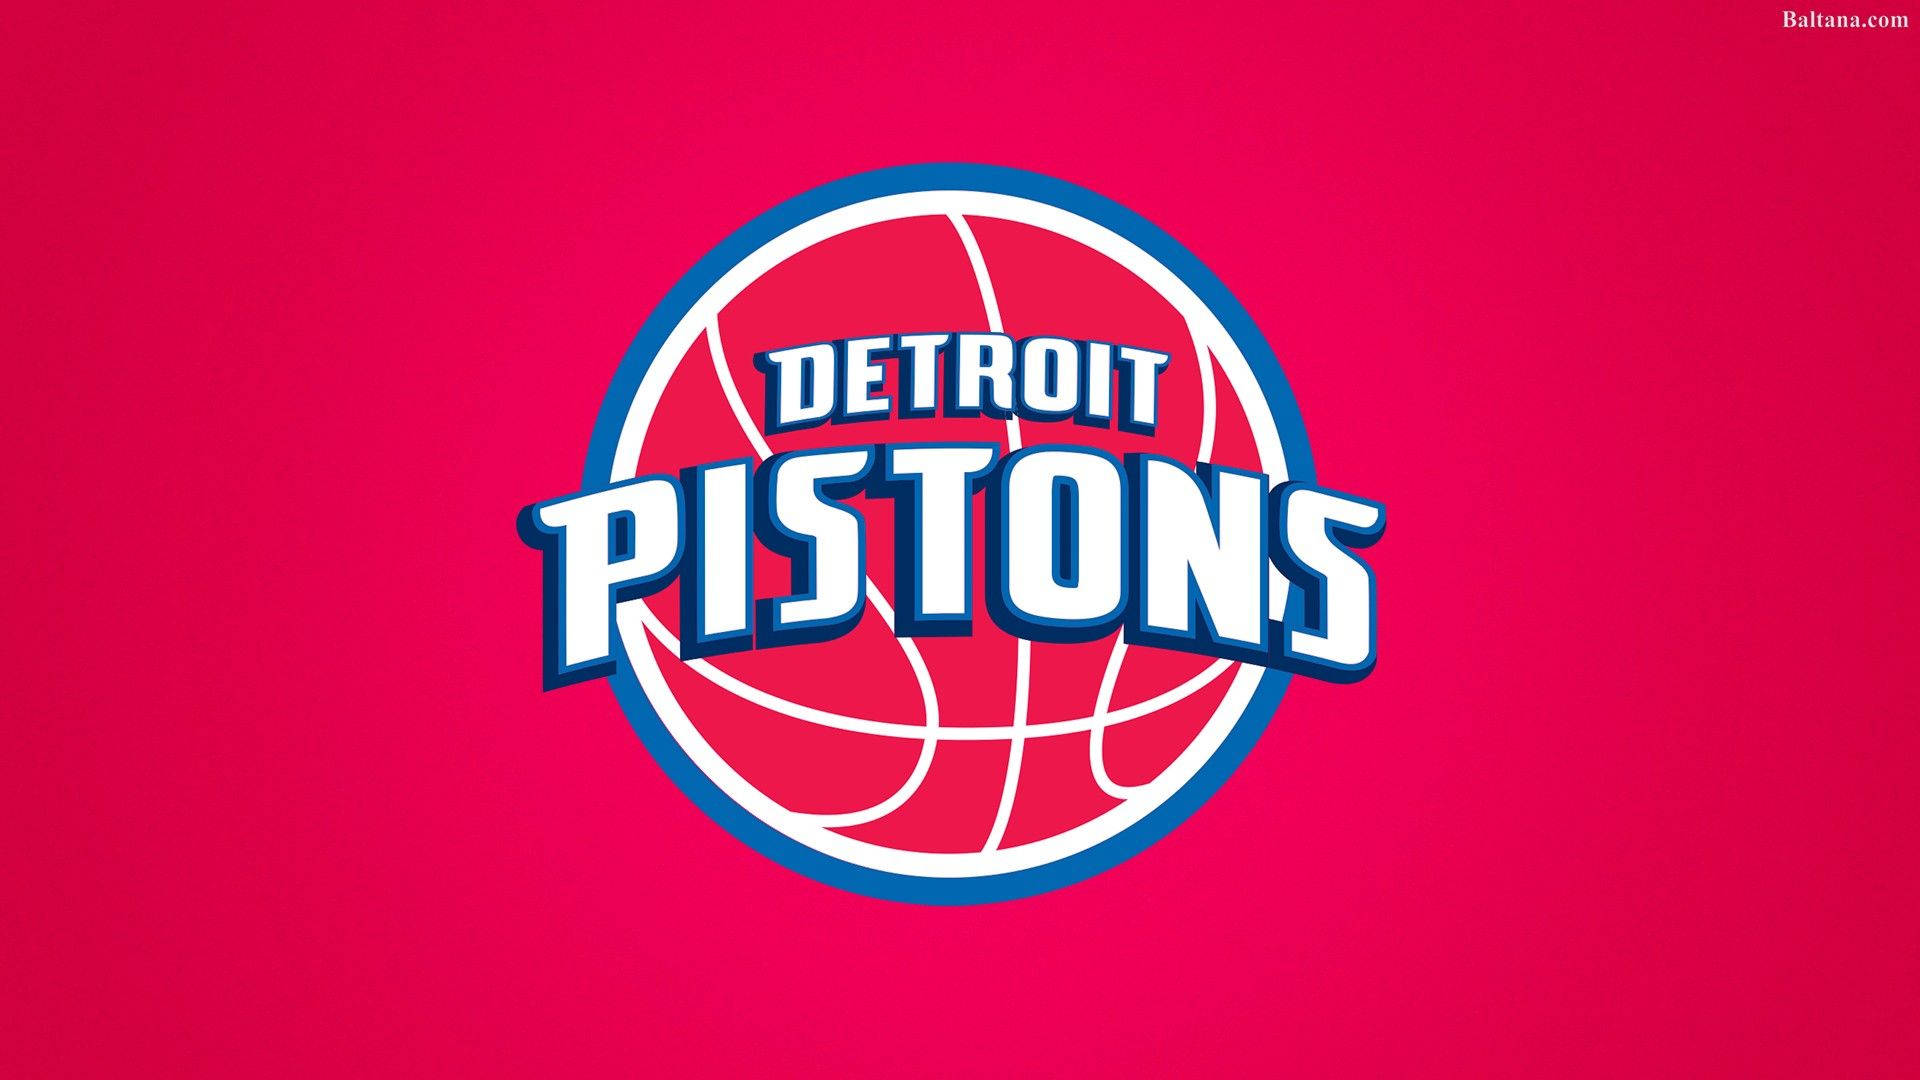 The Detroit Pistons In Action